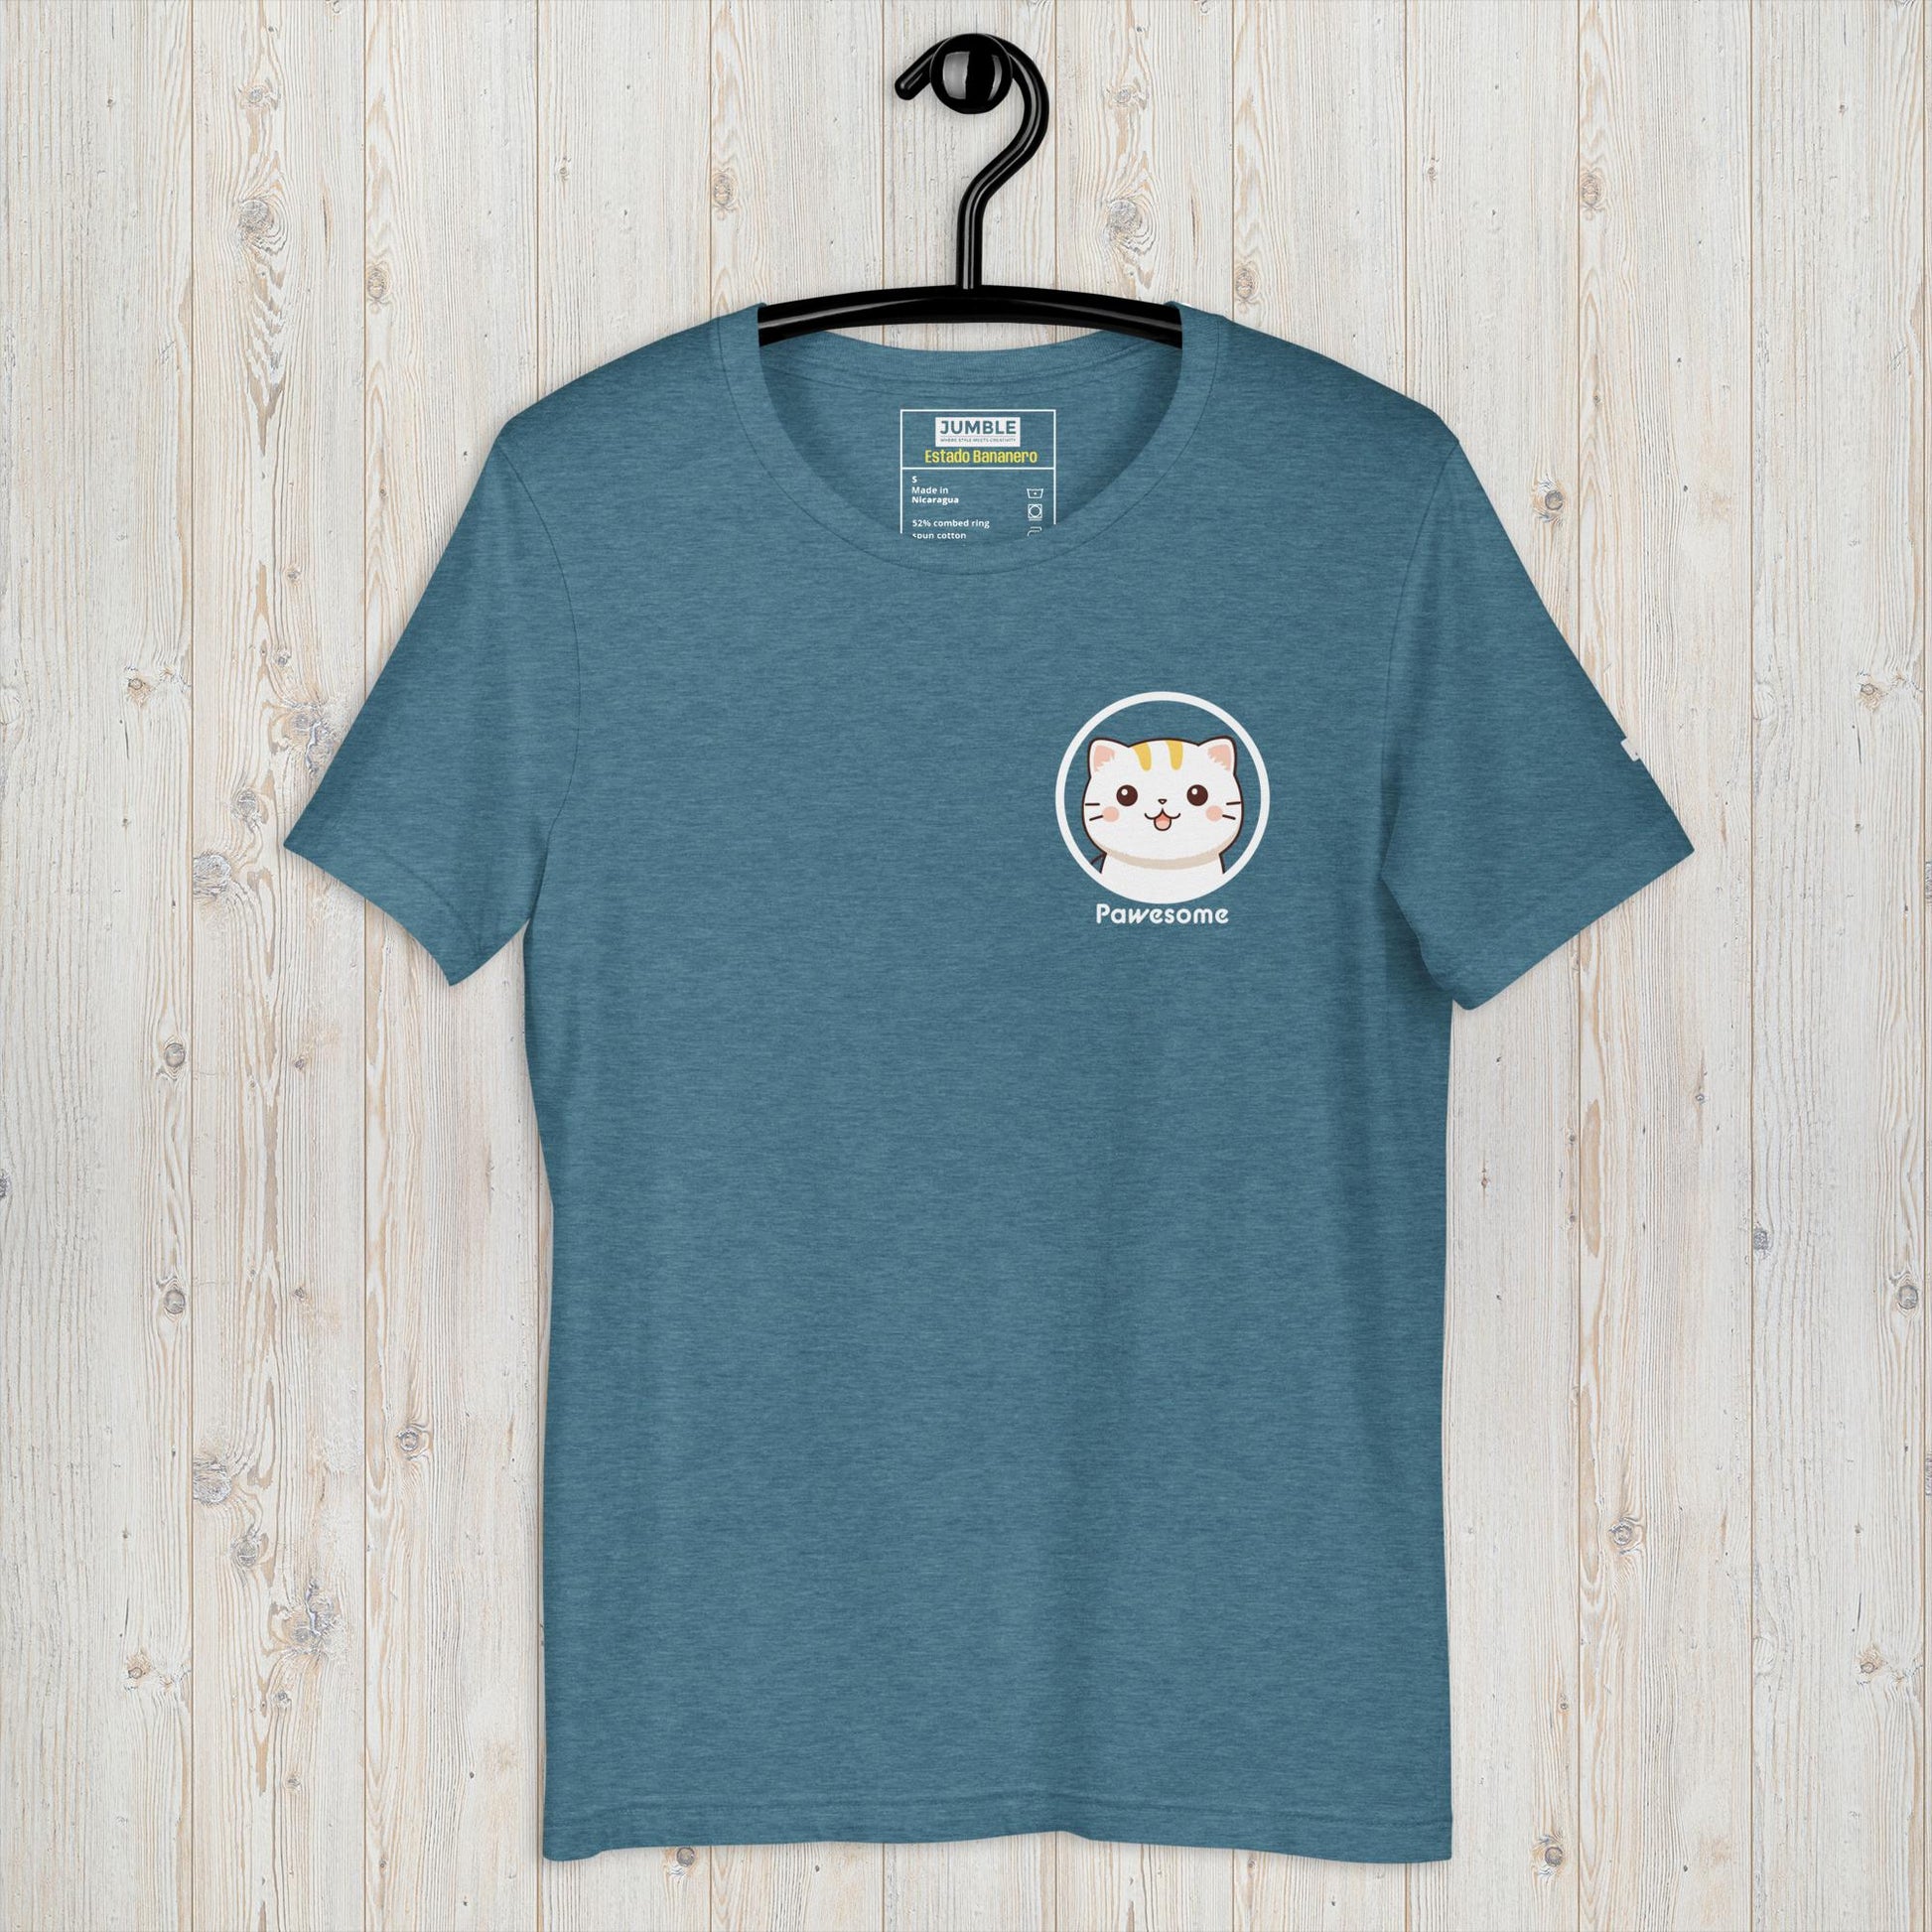 Pawesome Unisex t-shirt in deep teal on hanger